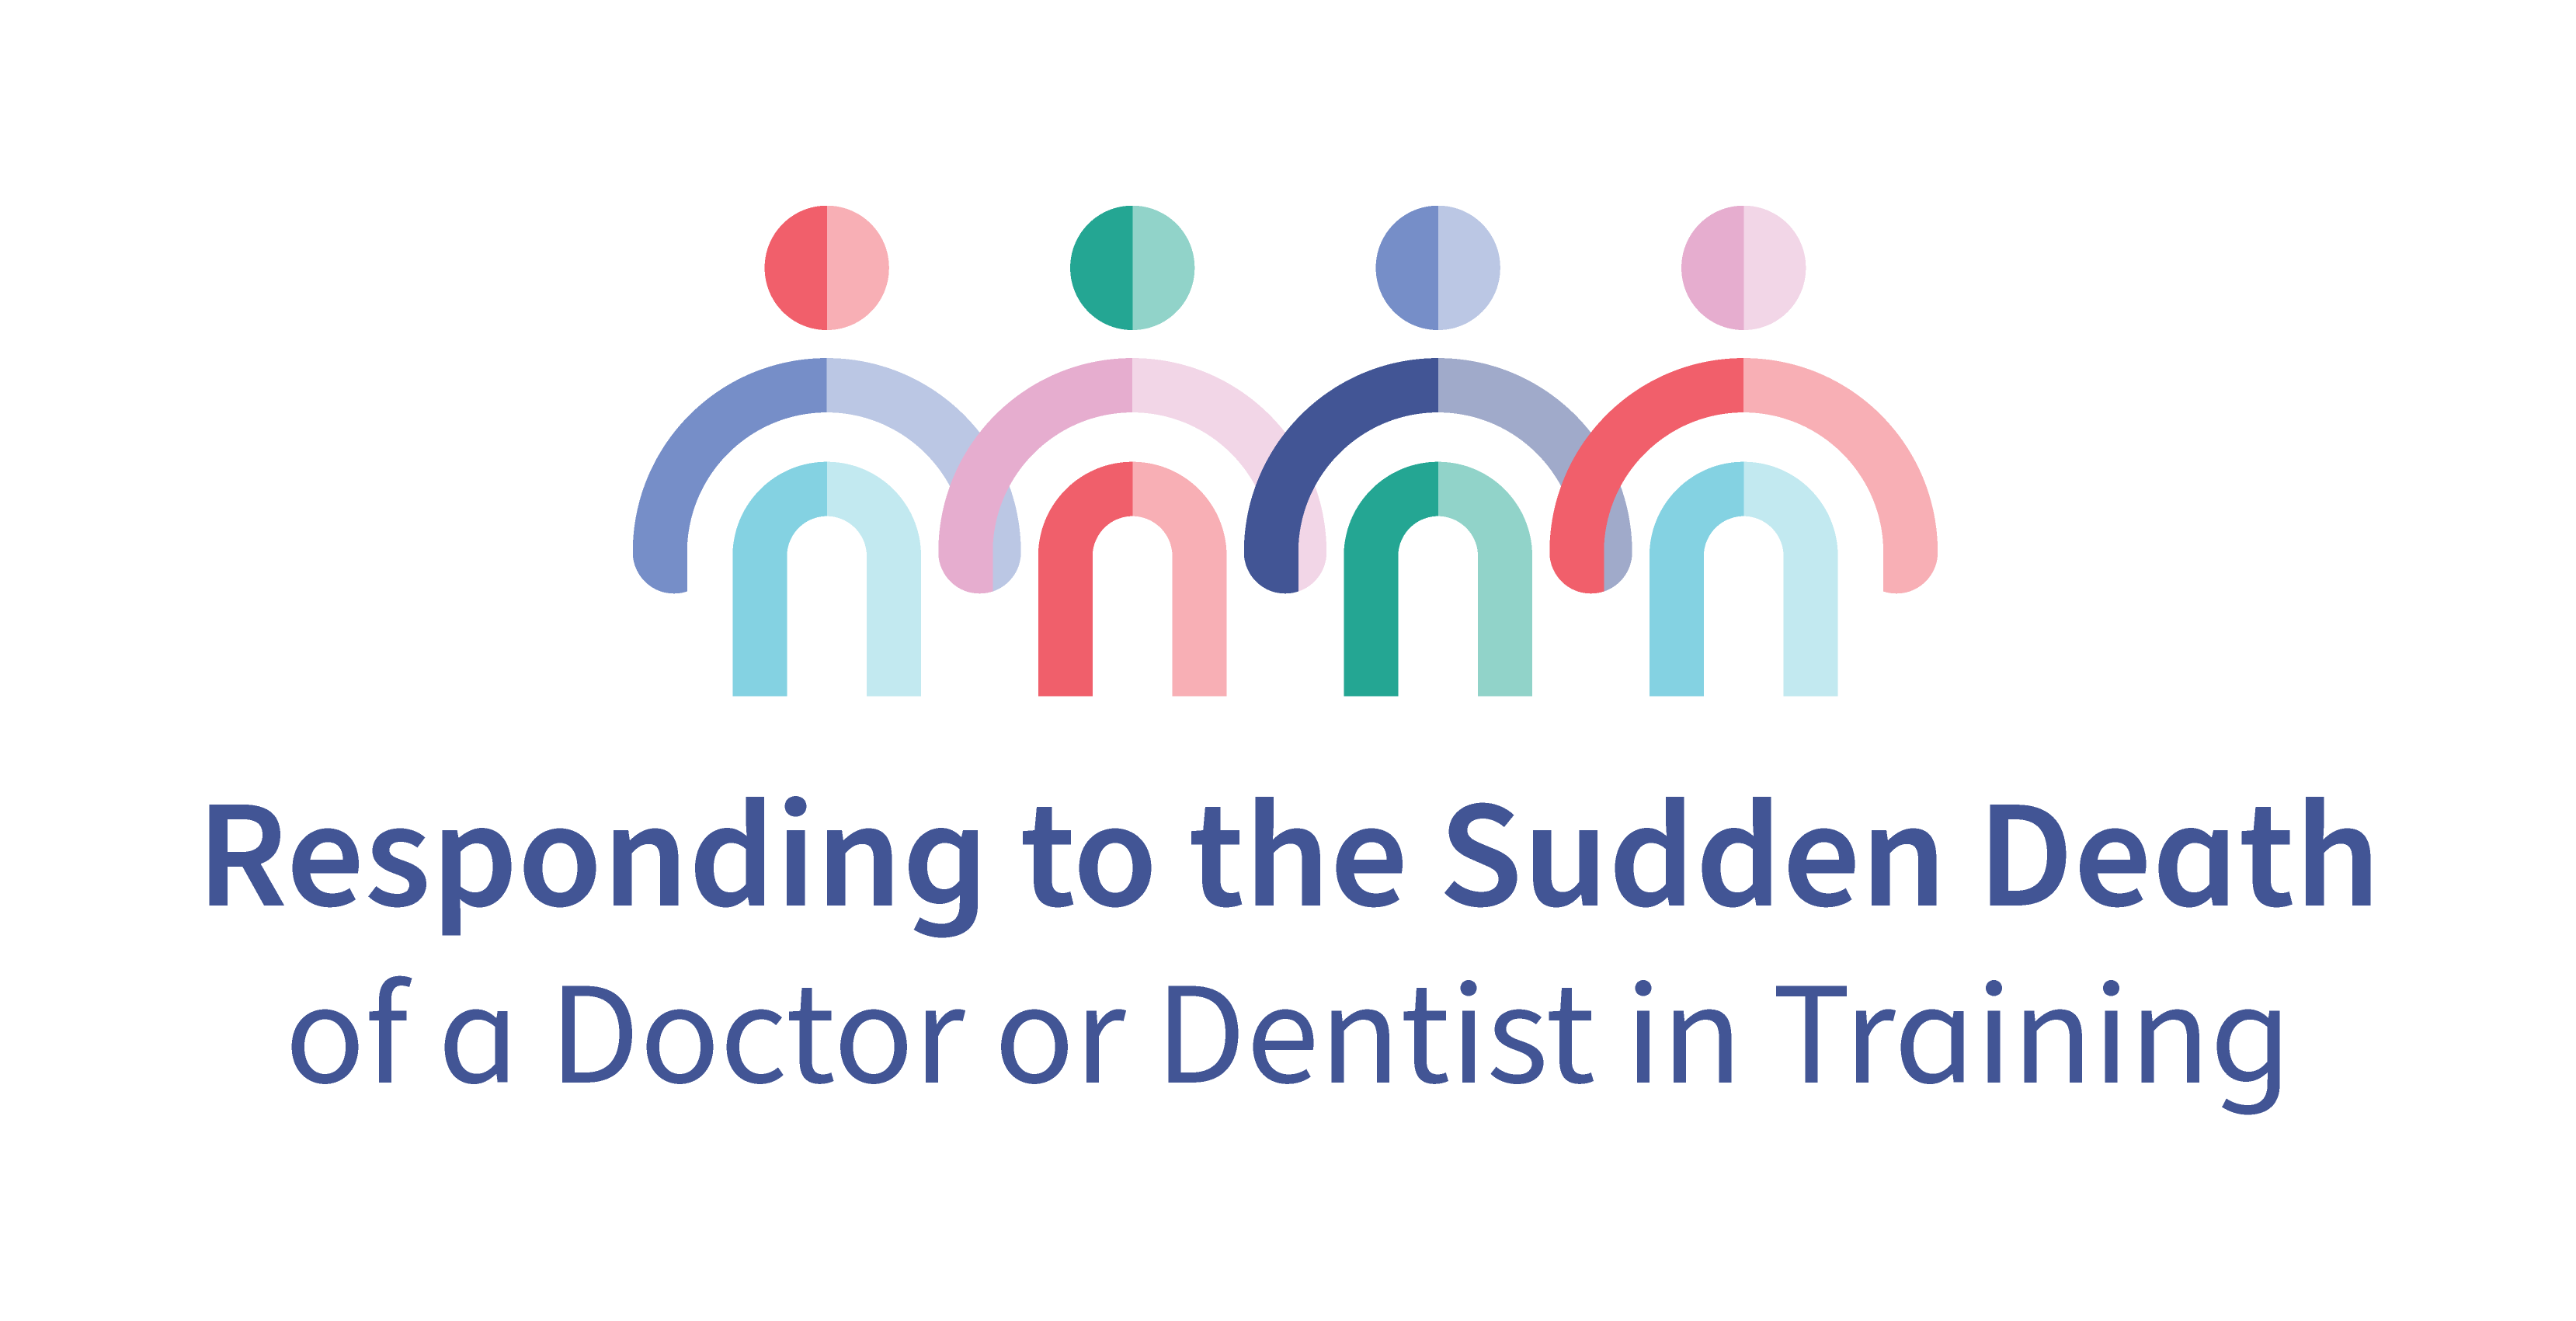 New education resource for UK four nations: Responding to the Sudden Death of a Doctor or Dentist in Training (1)